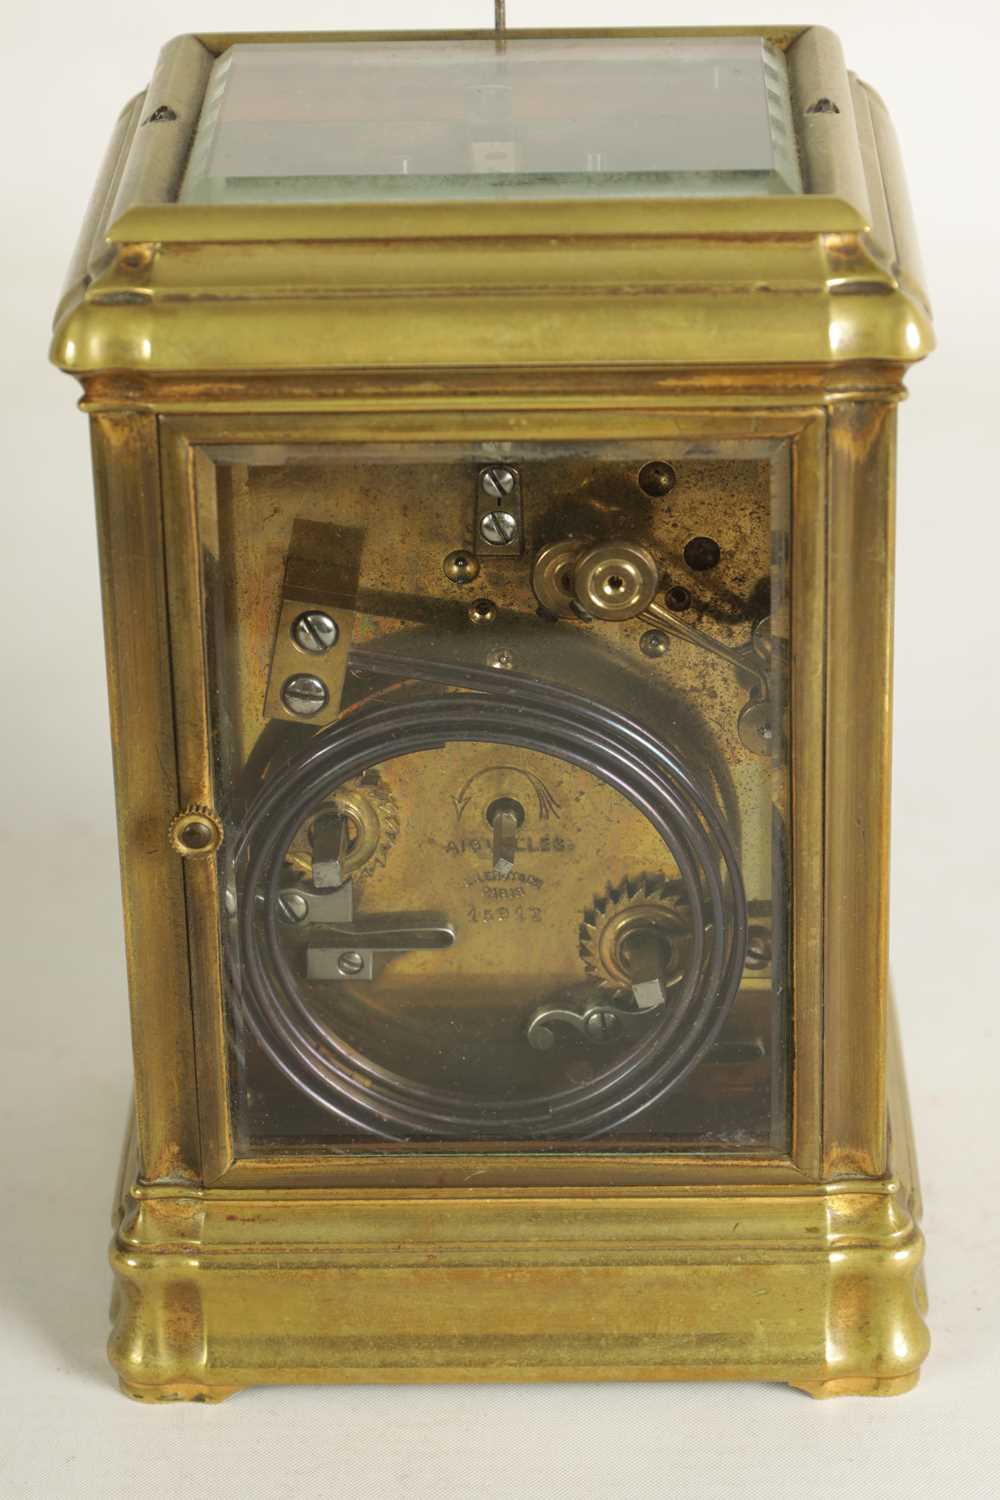 L. LEROY, PARIS. A LATE 19TH CENTURY REPEATING QUARTER CHIMING CARRIAGE CLOCK - Image 6 of 8